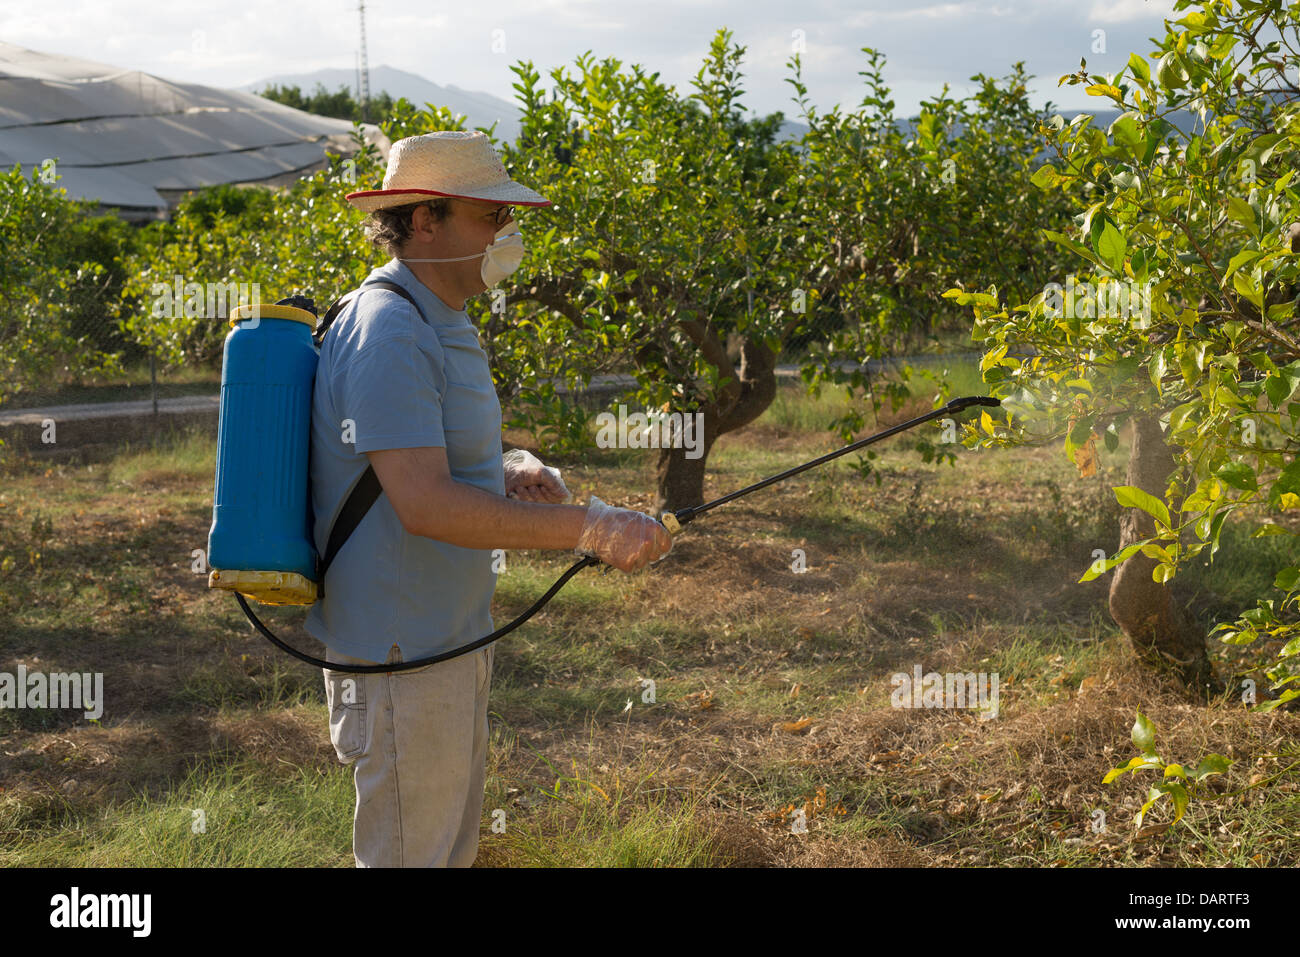 Agricultural worker spraying pesticide on fruit trees Stock Photo